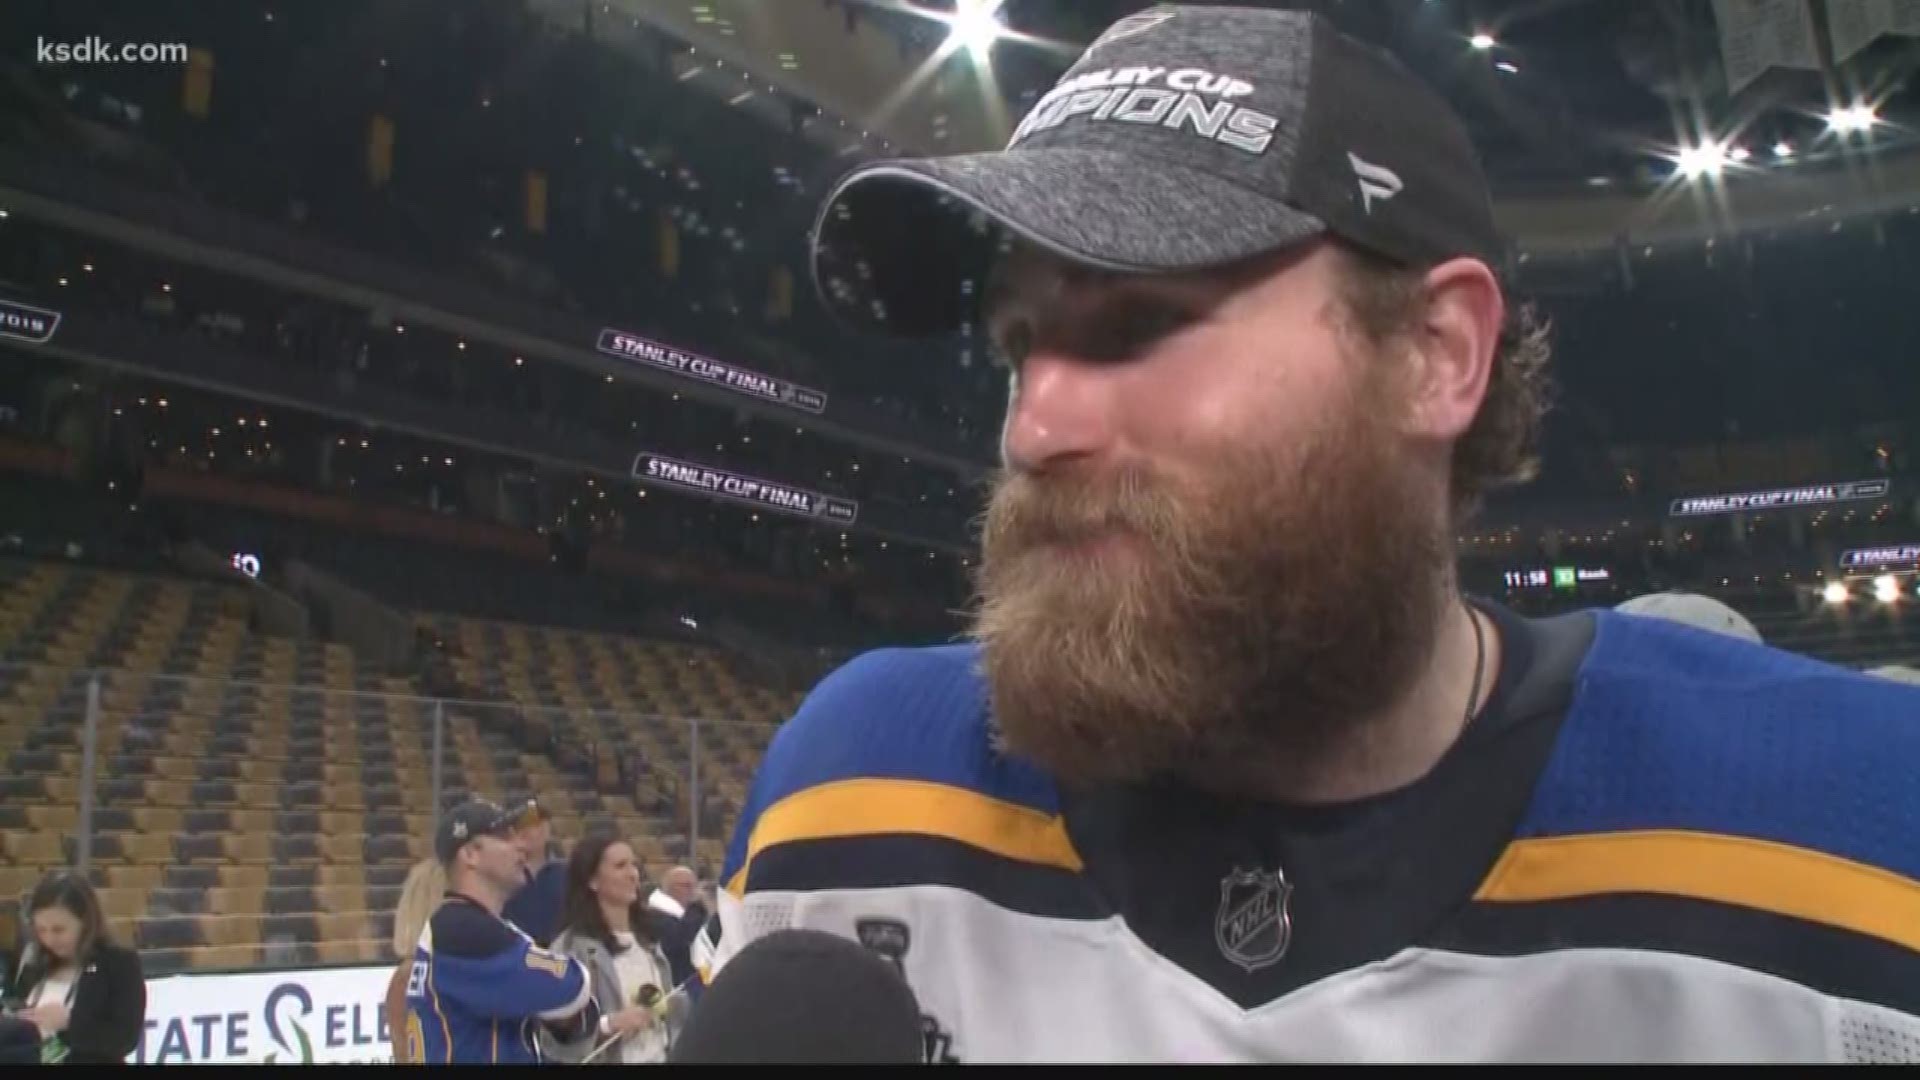 Jordan Binnington or Ryan O'Reilly? 5 On Your Side's Frank Cusumano and Rene Knott make their cases for who was the biggest factor in the Blues winning the Stanley Cup.